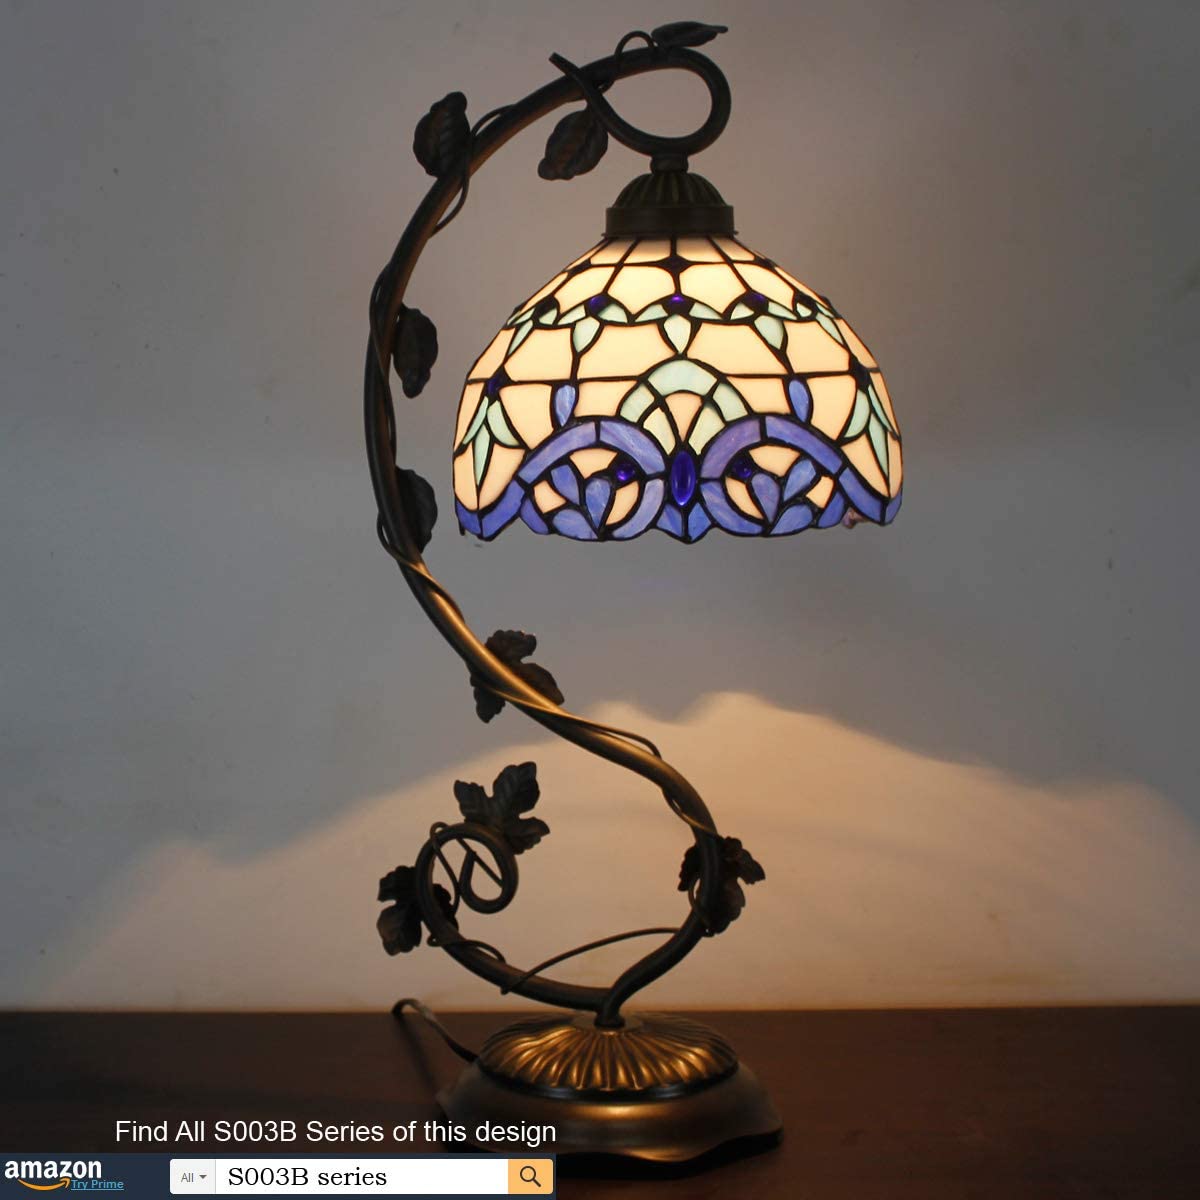 SHADY  Style Lamp White Blue Stained Glass Table Lamp Reading Desk Light Metal Leaf Base 8X10X21 Inches Decor Small Space Bedside Bedroom Home Office S003B Series